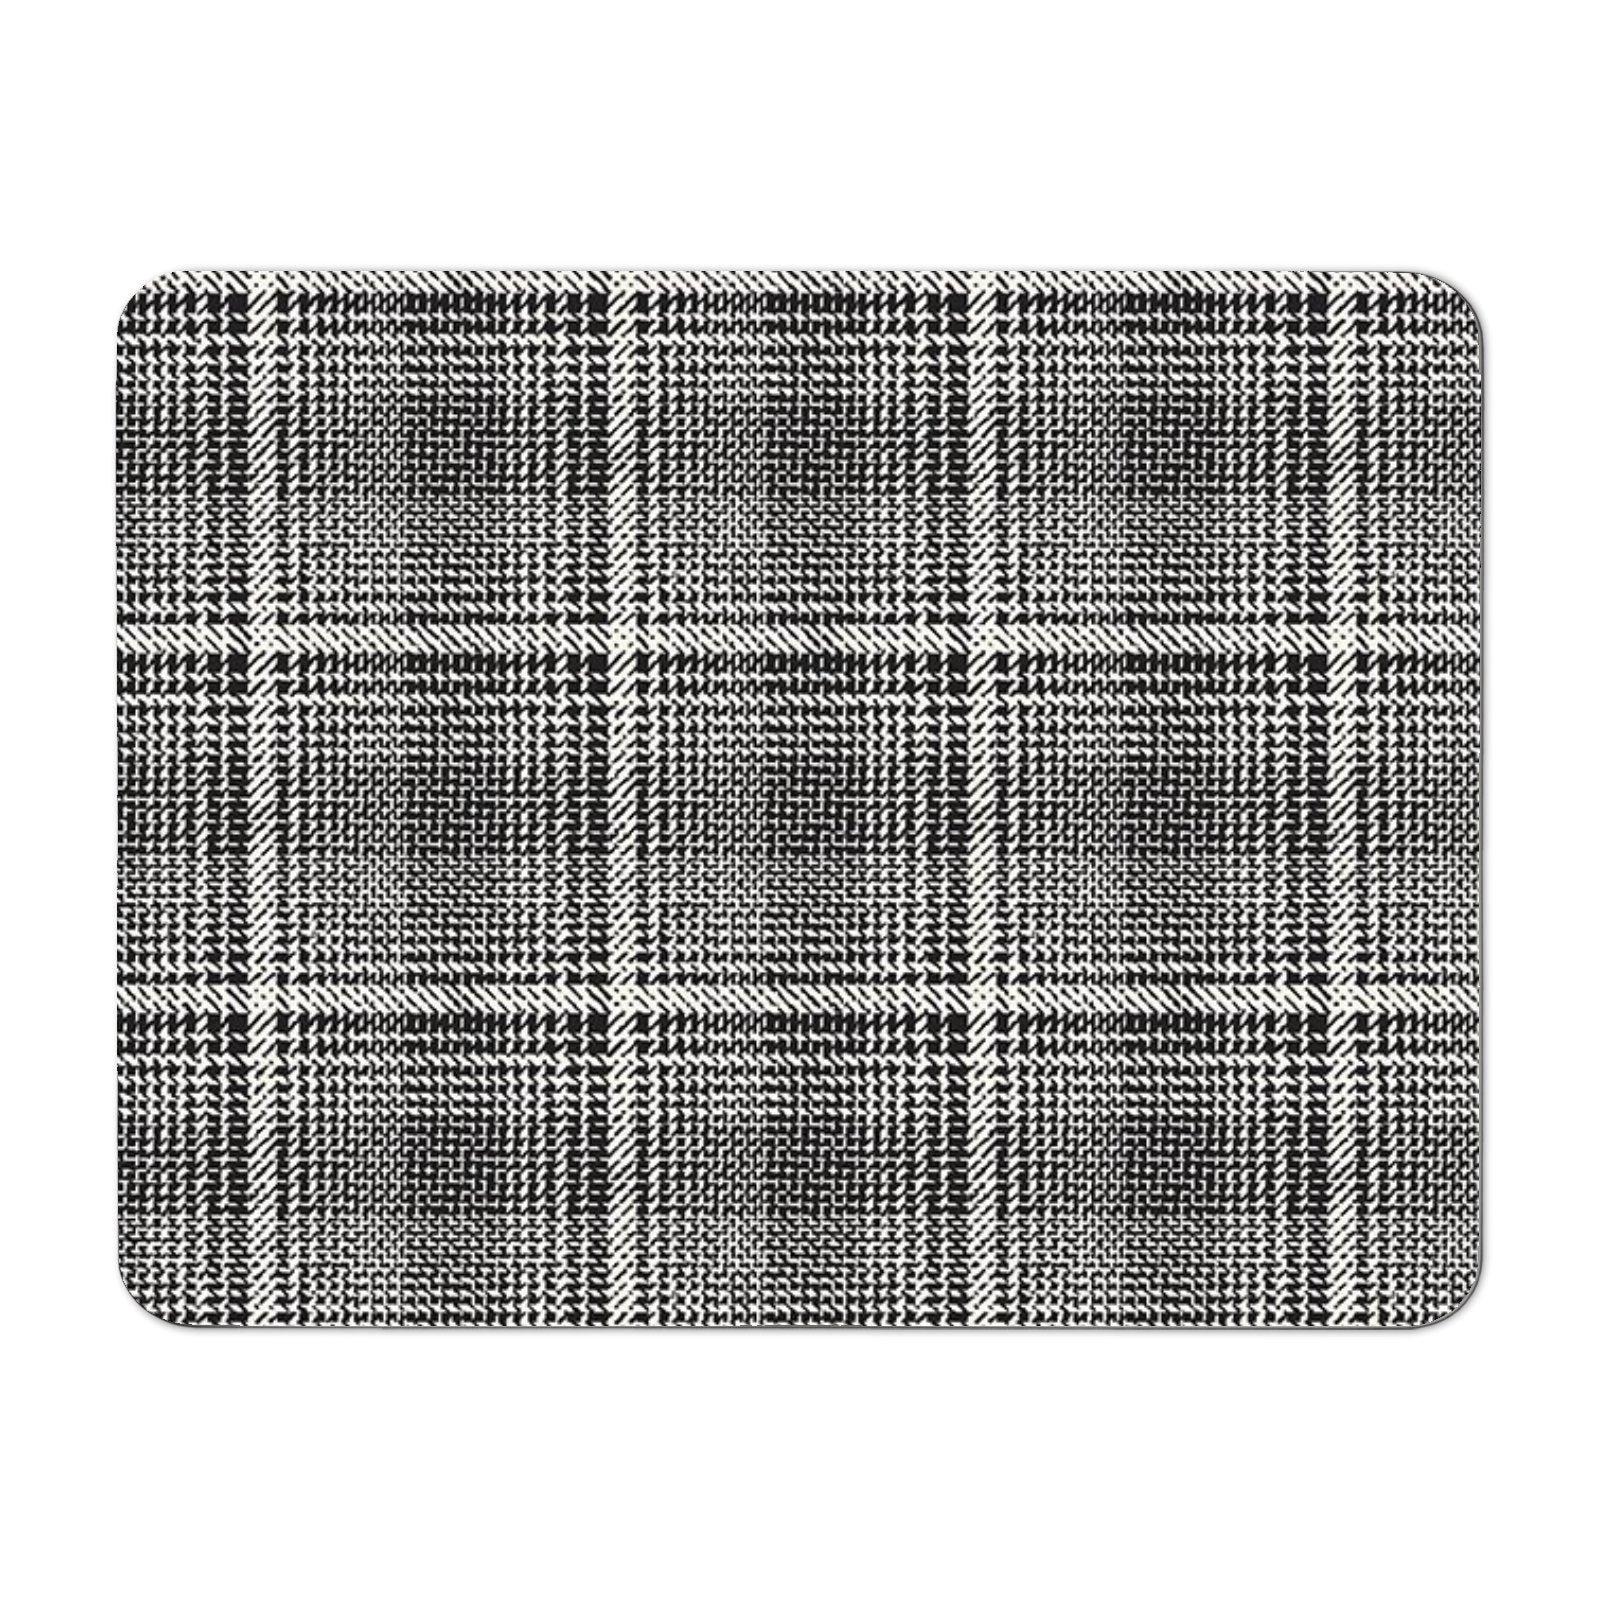 Monochrome Textured Checked Pattern Placemats